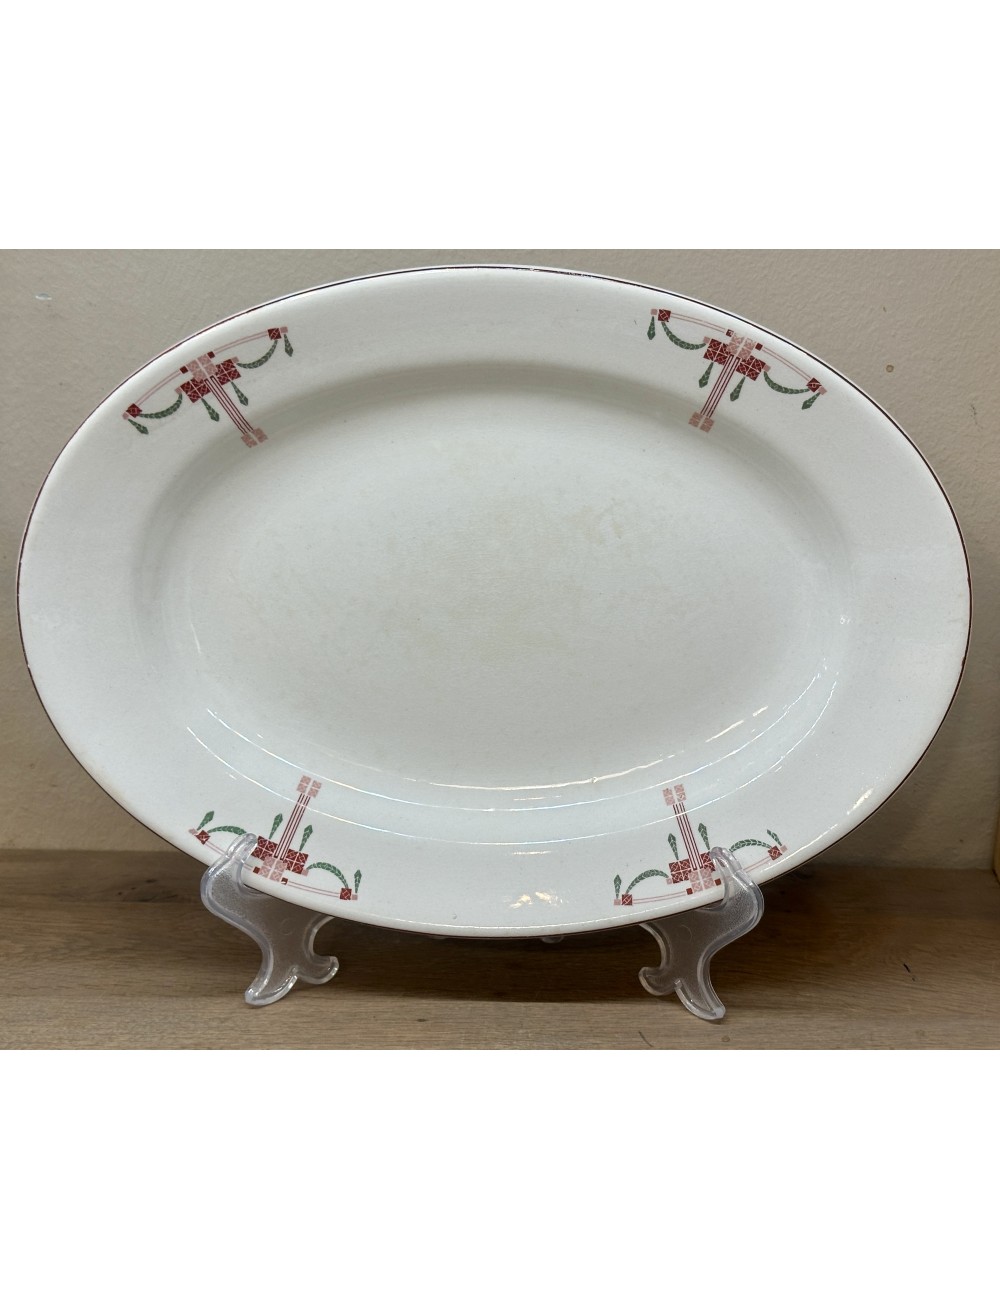 Plate - flat, oval, model - Petrus Regout - décor 878 uigevoerd in red, pink and green with red / brown fillet border